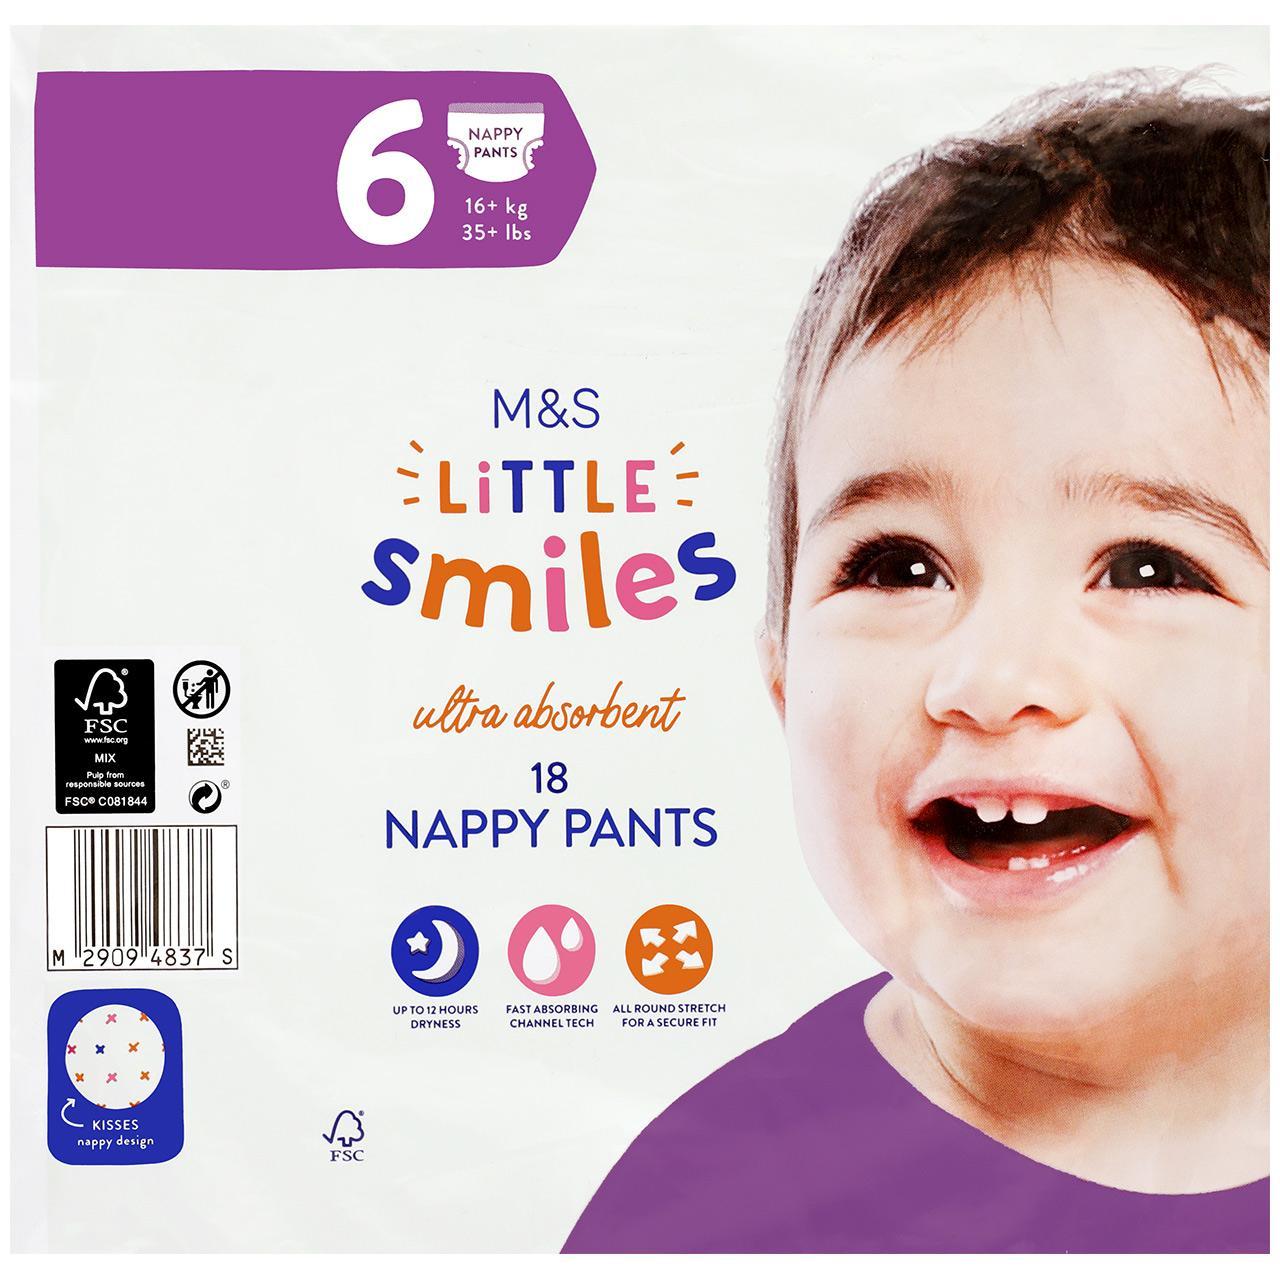 Pampers Baby Dry Night Nappy Pants Essential Pack Nappies Size 5, 12kg-17kg  x28